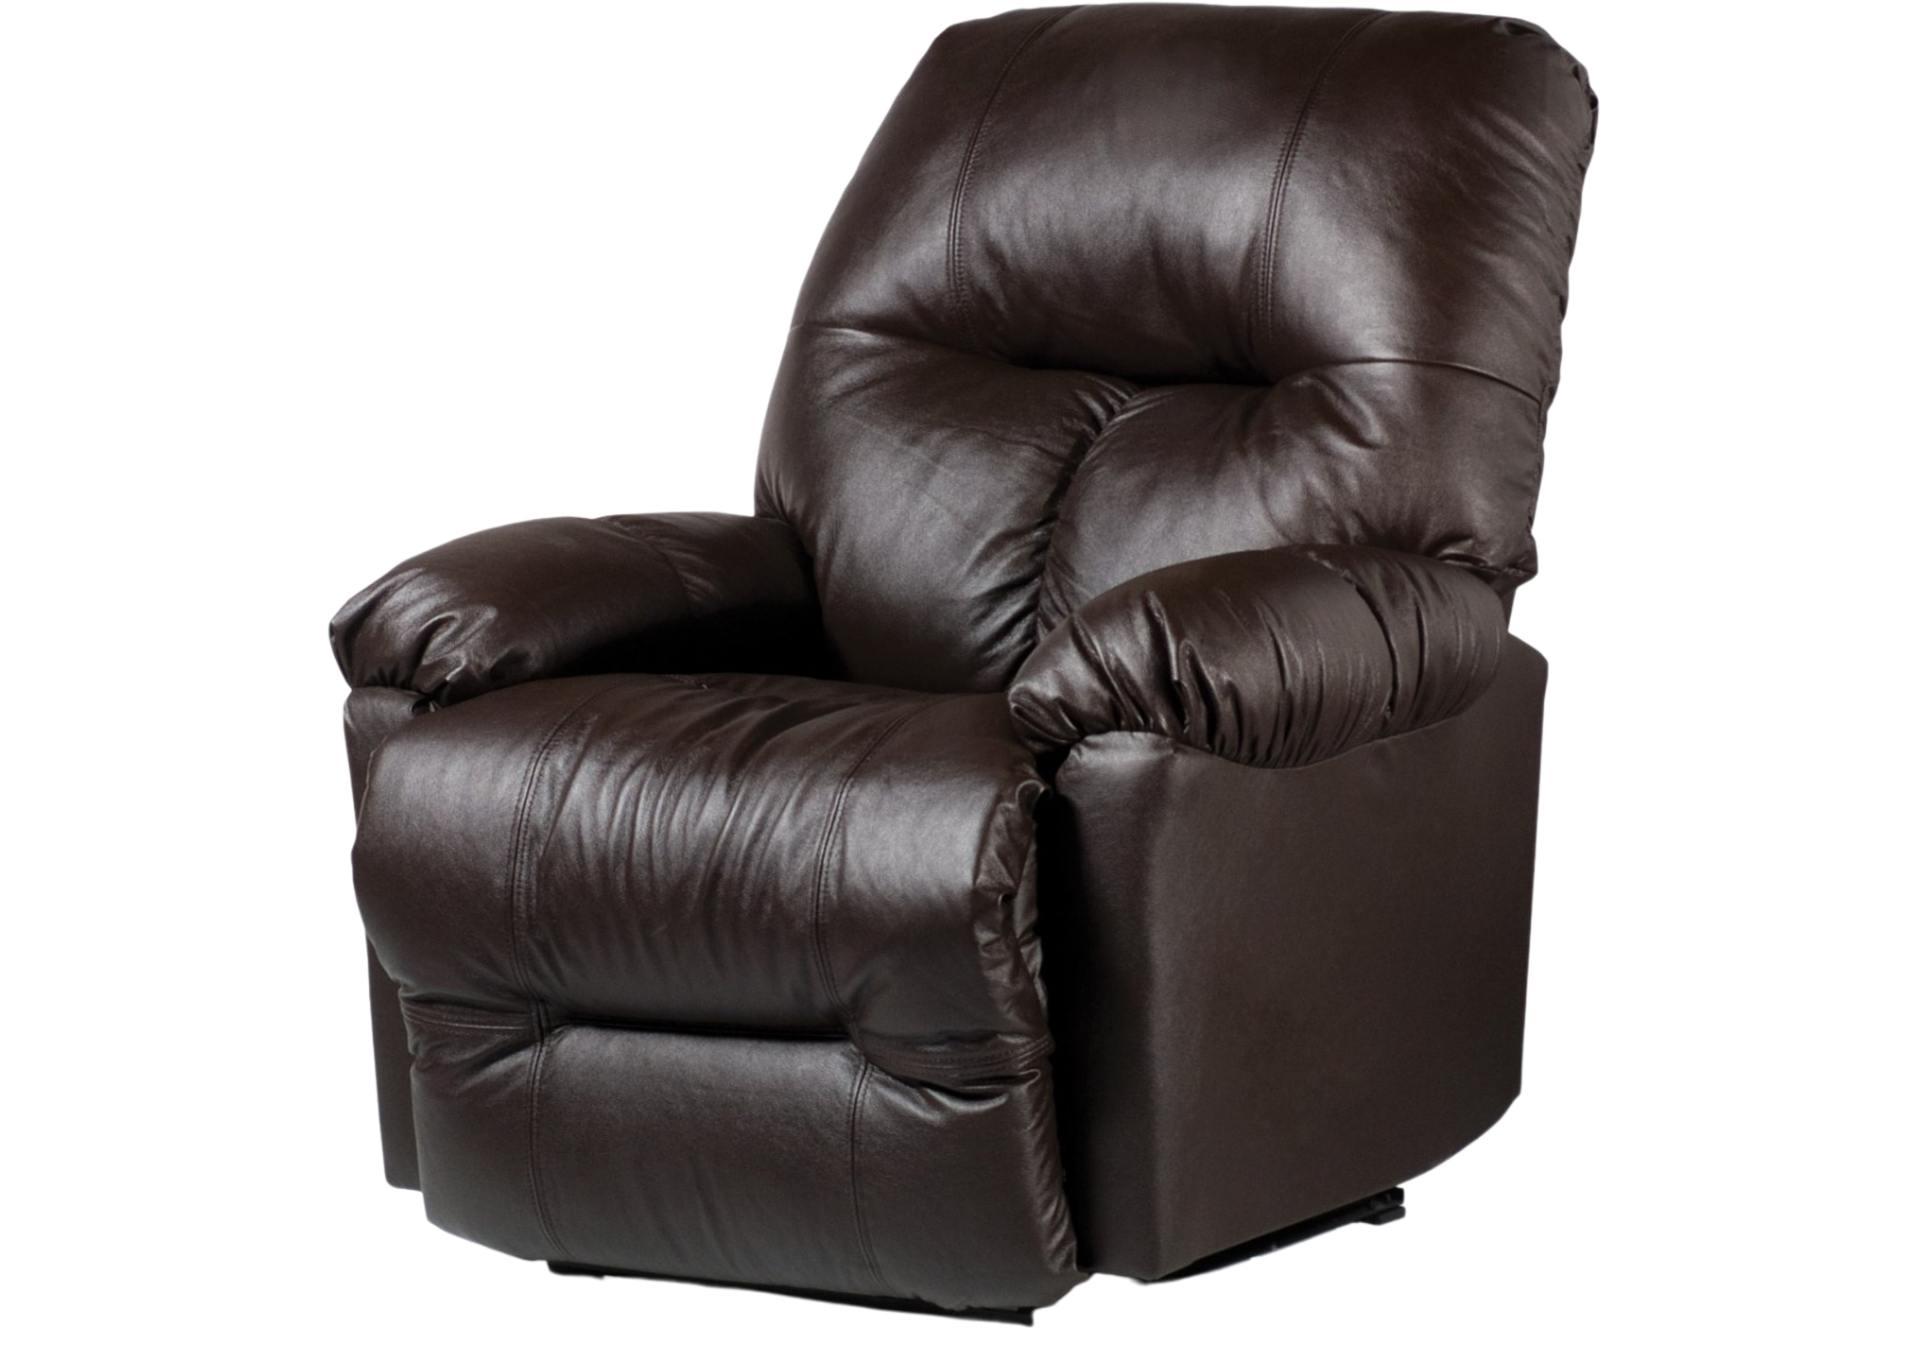 WANDERER CHOCOLATE LEATHER SPACE SAVER RECLINER,BEST CHAIRS INC